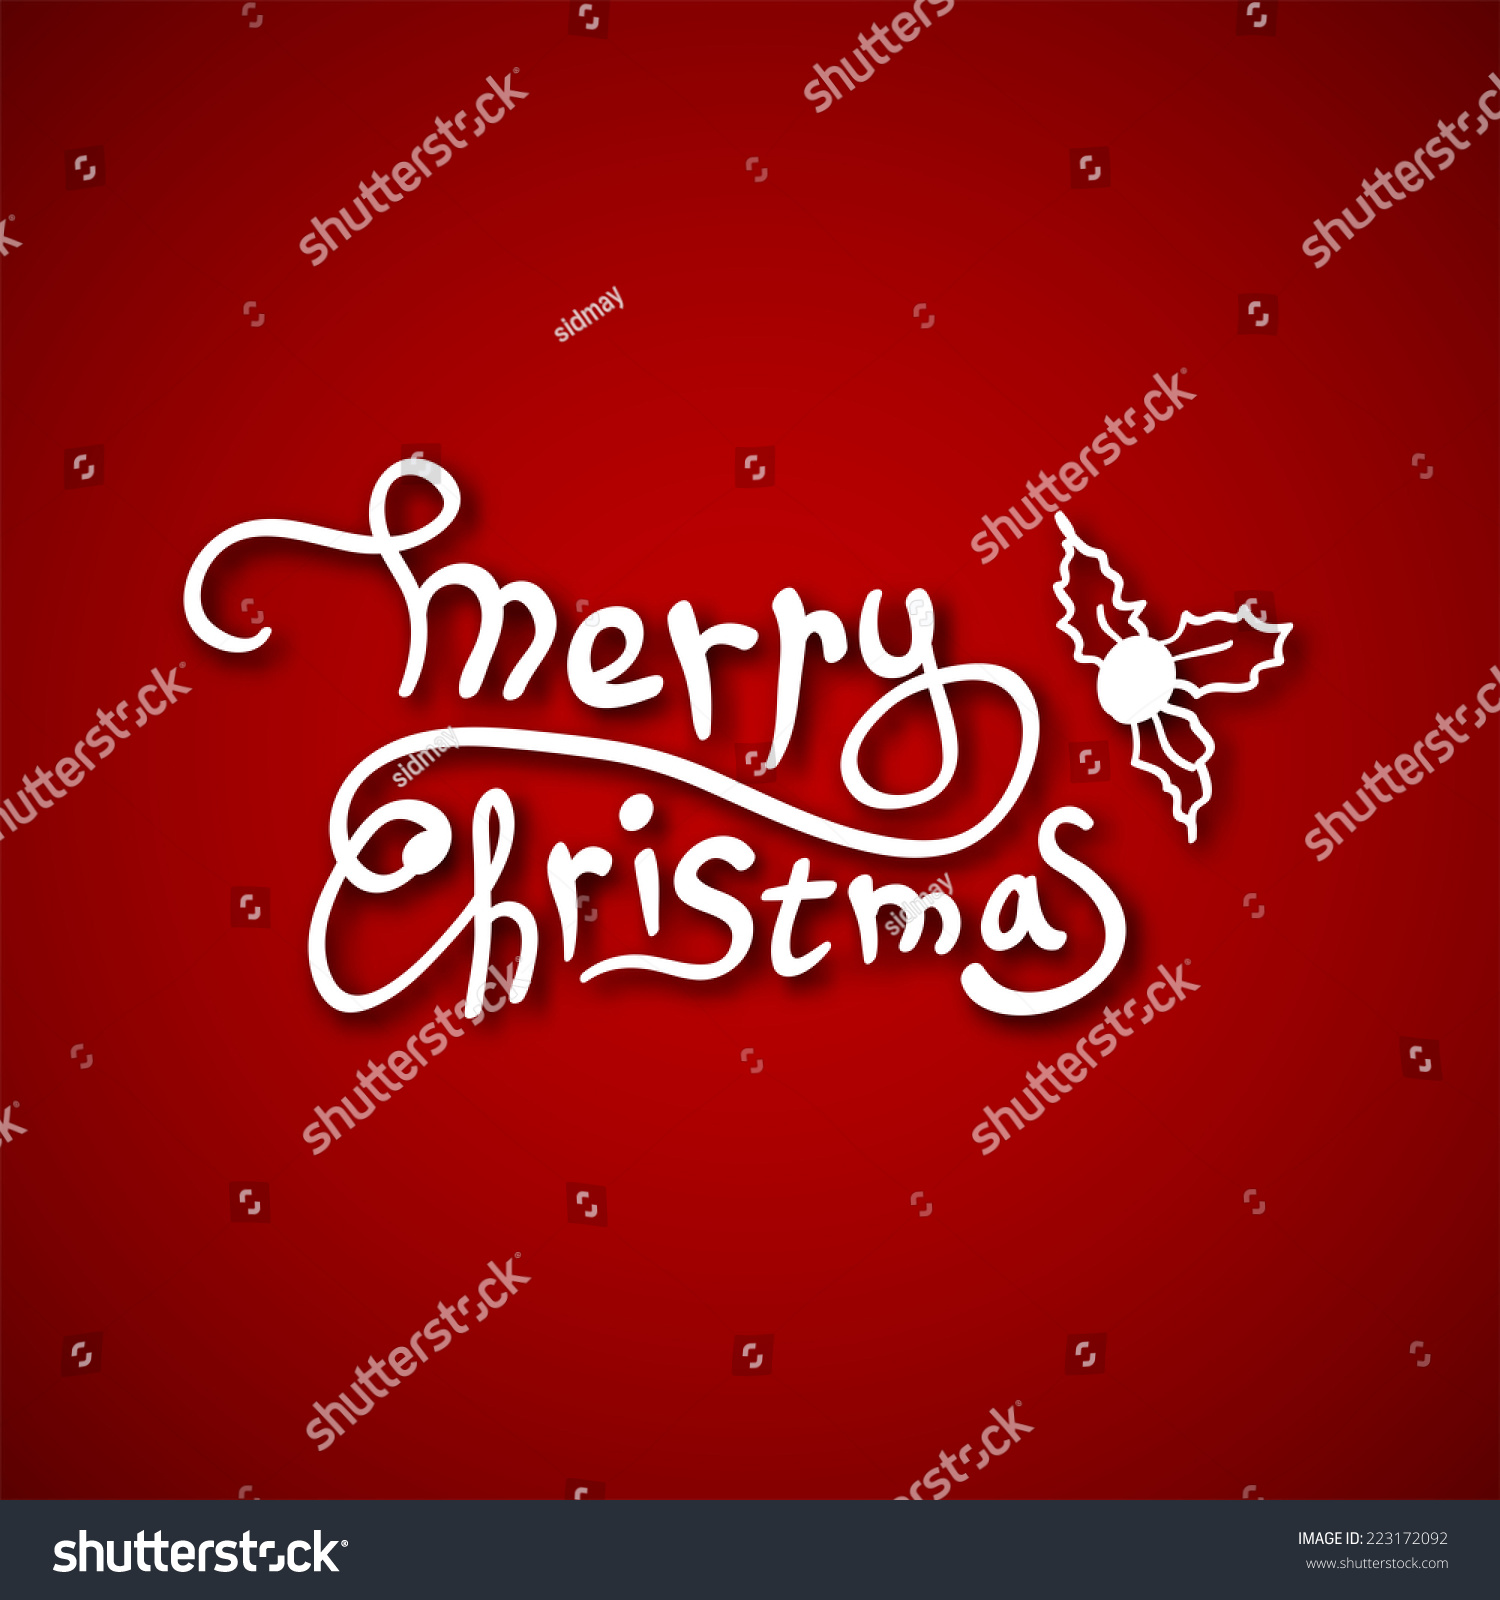 Beautiful text design of Merry Christmas on red color background vector illustration